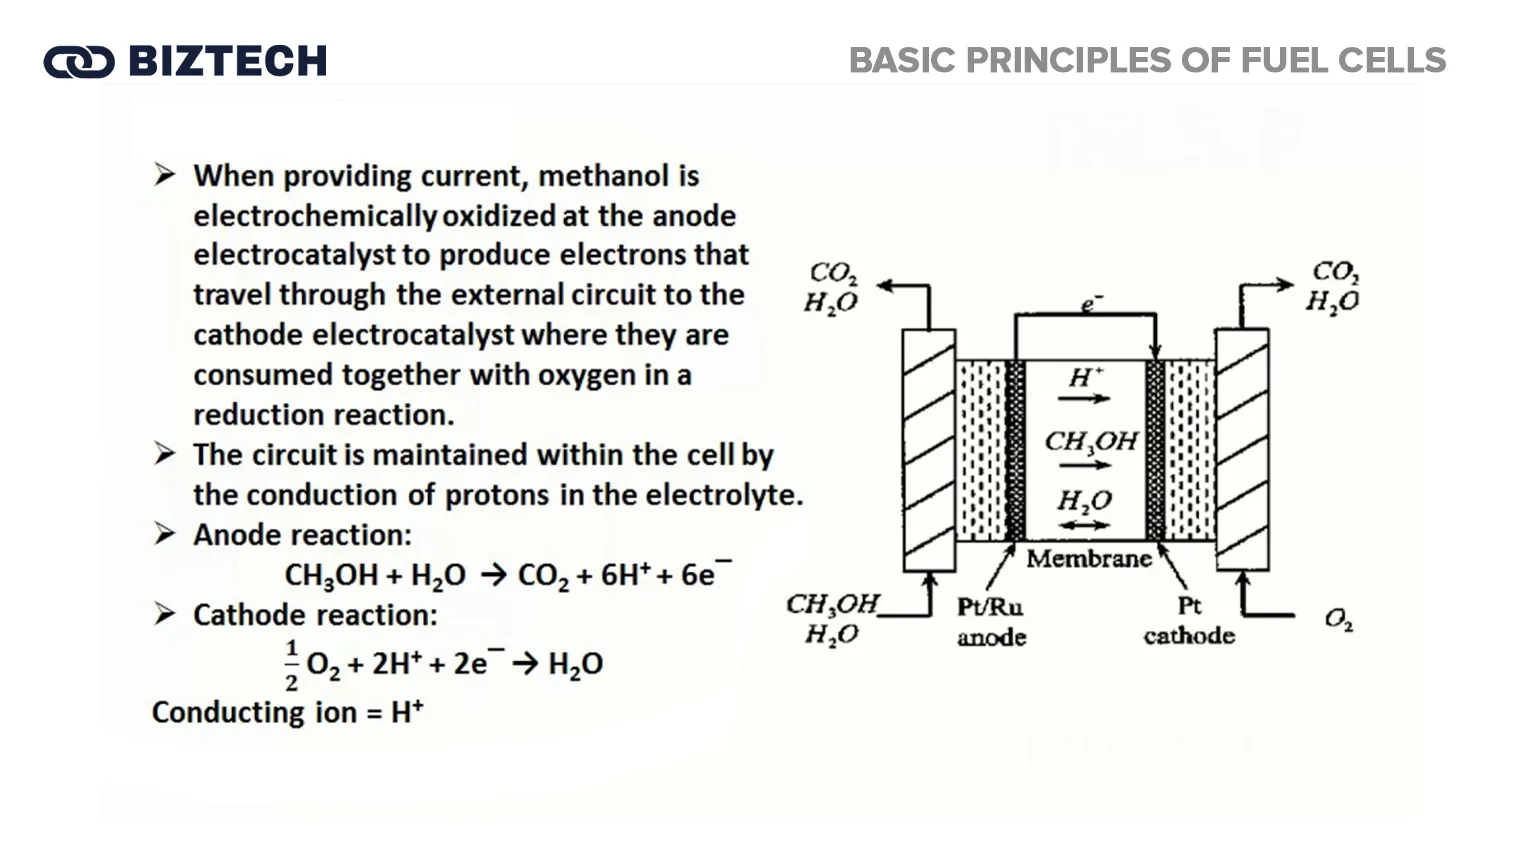 Basic principles of fuel cells